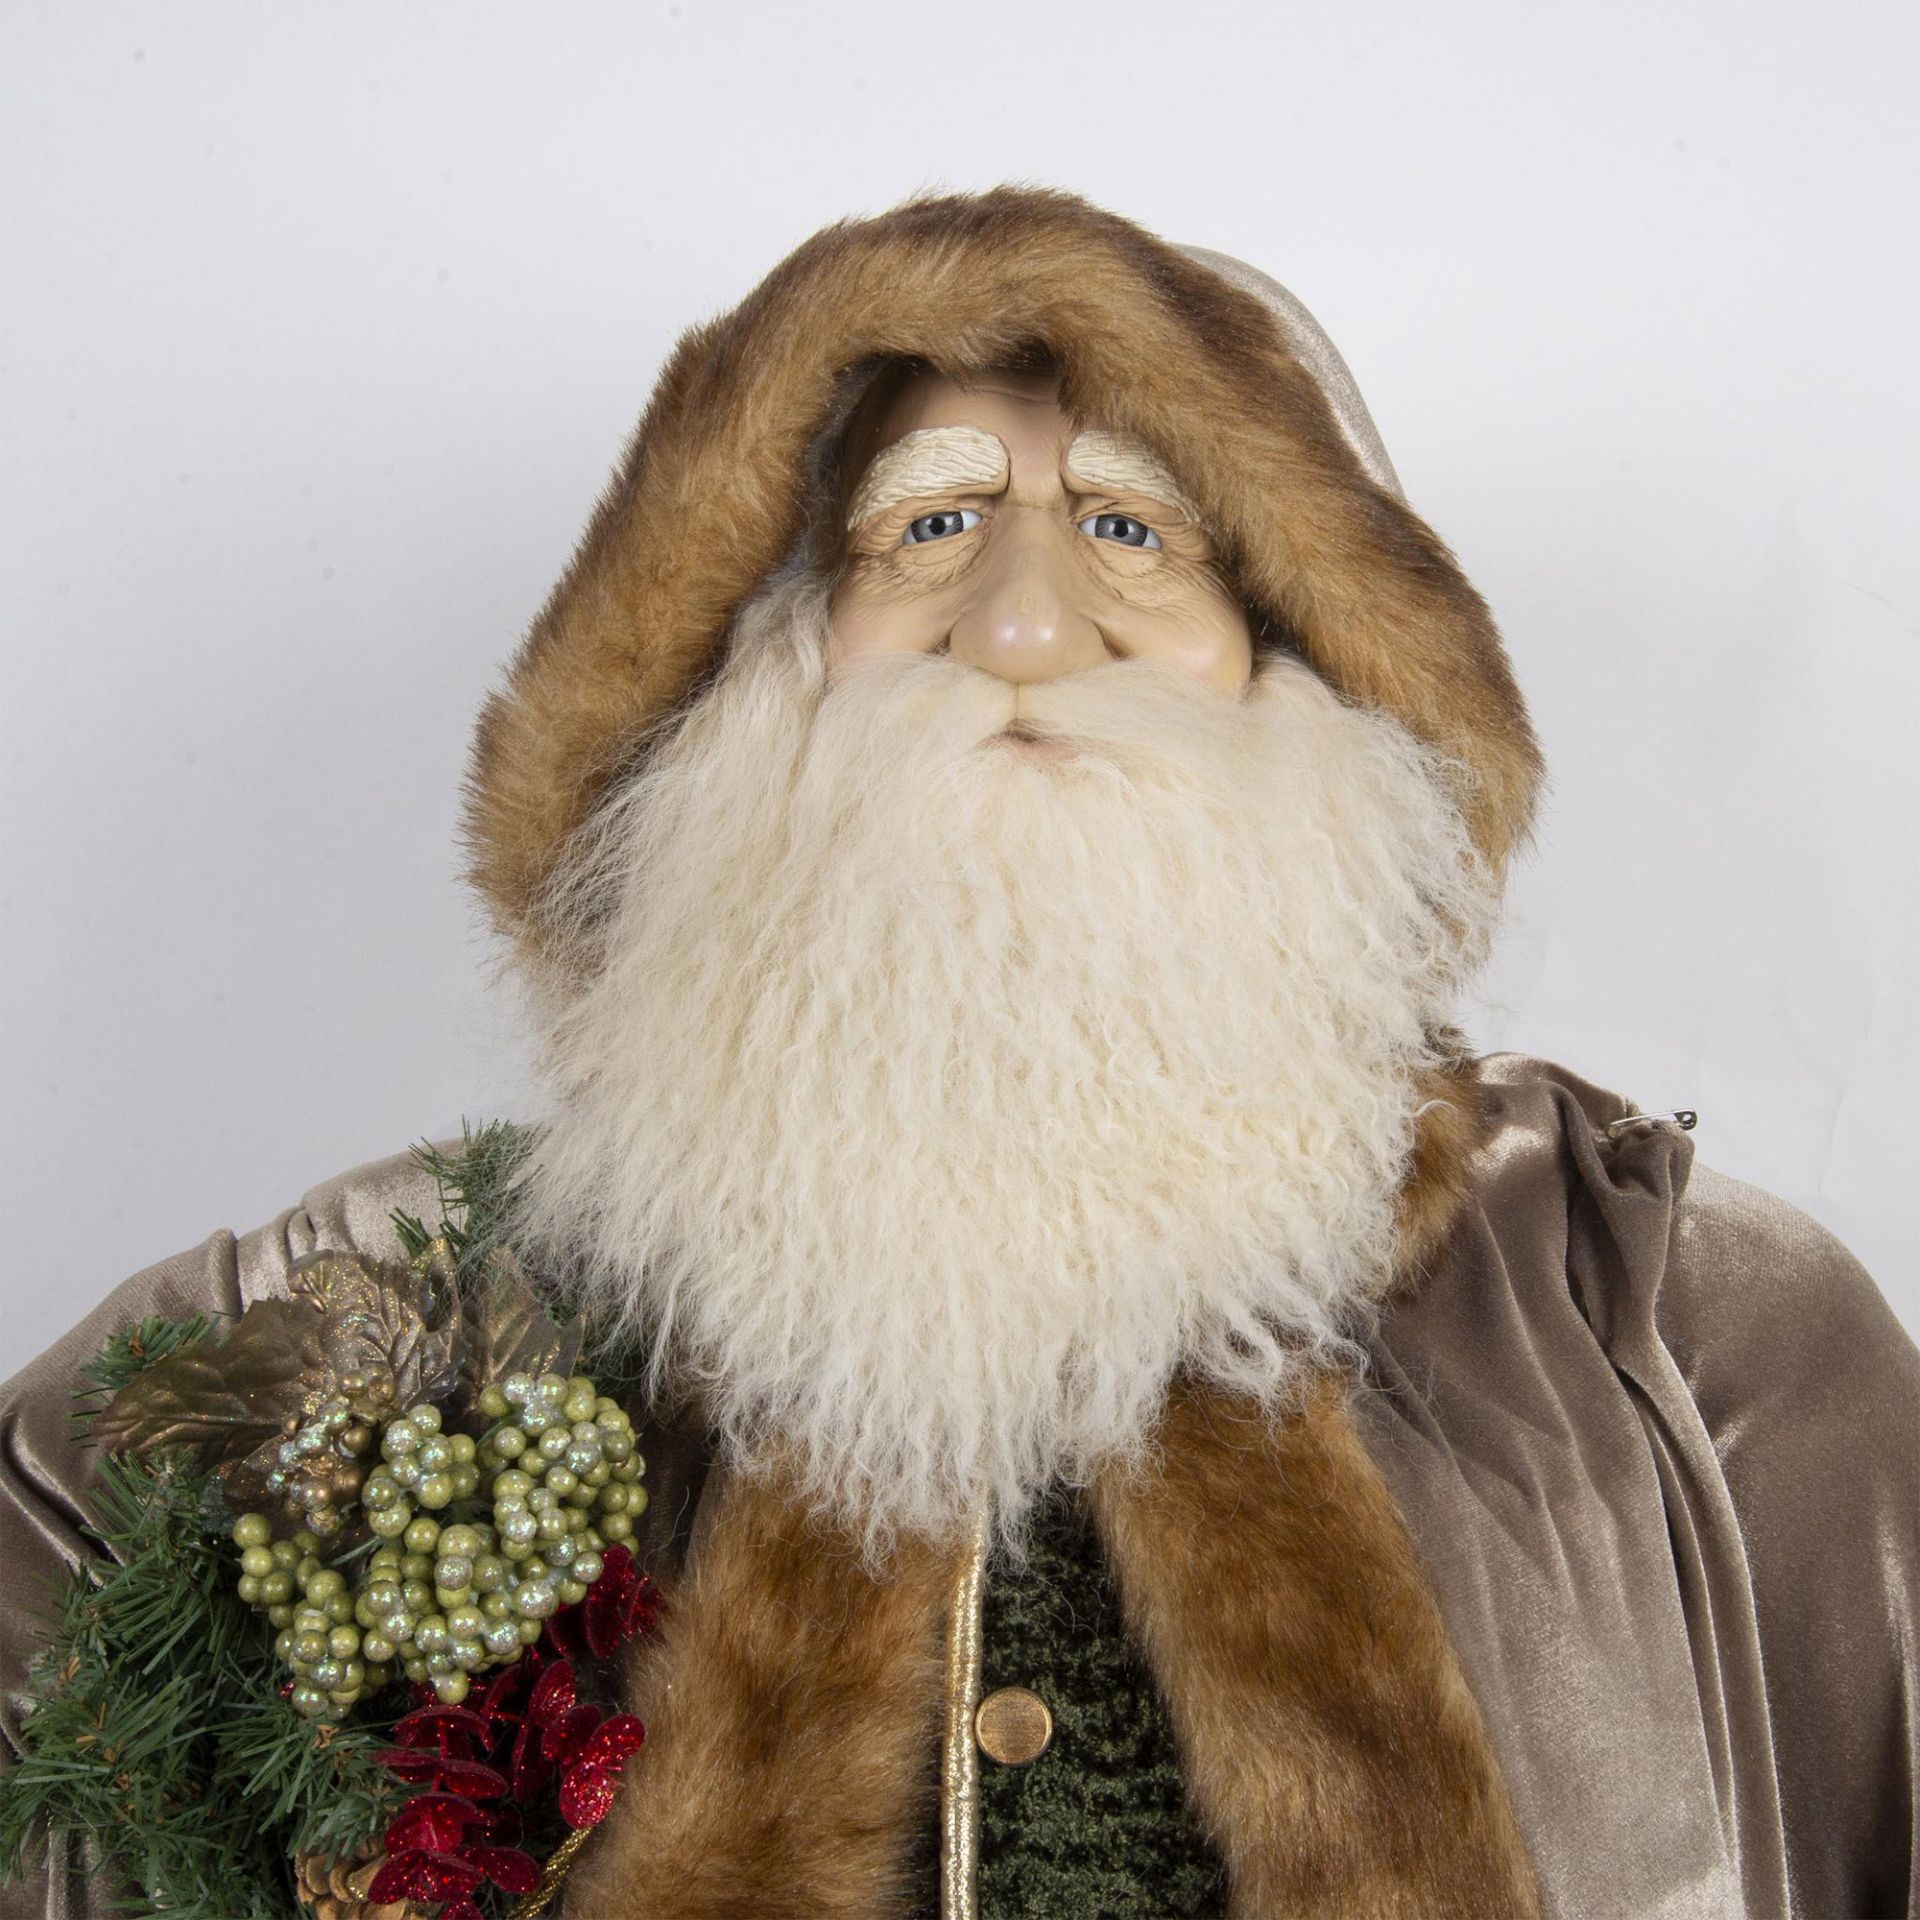 Life Sized Standing Santa Claus 56"" - Image 2 of 5